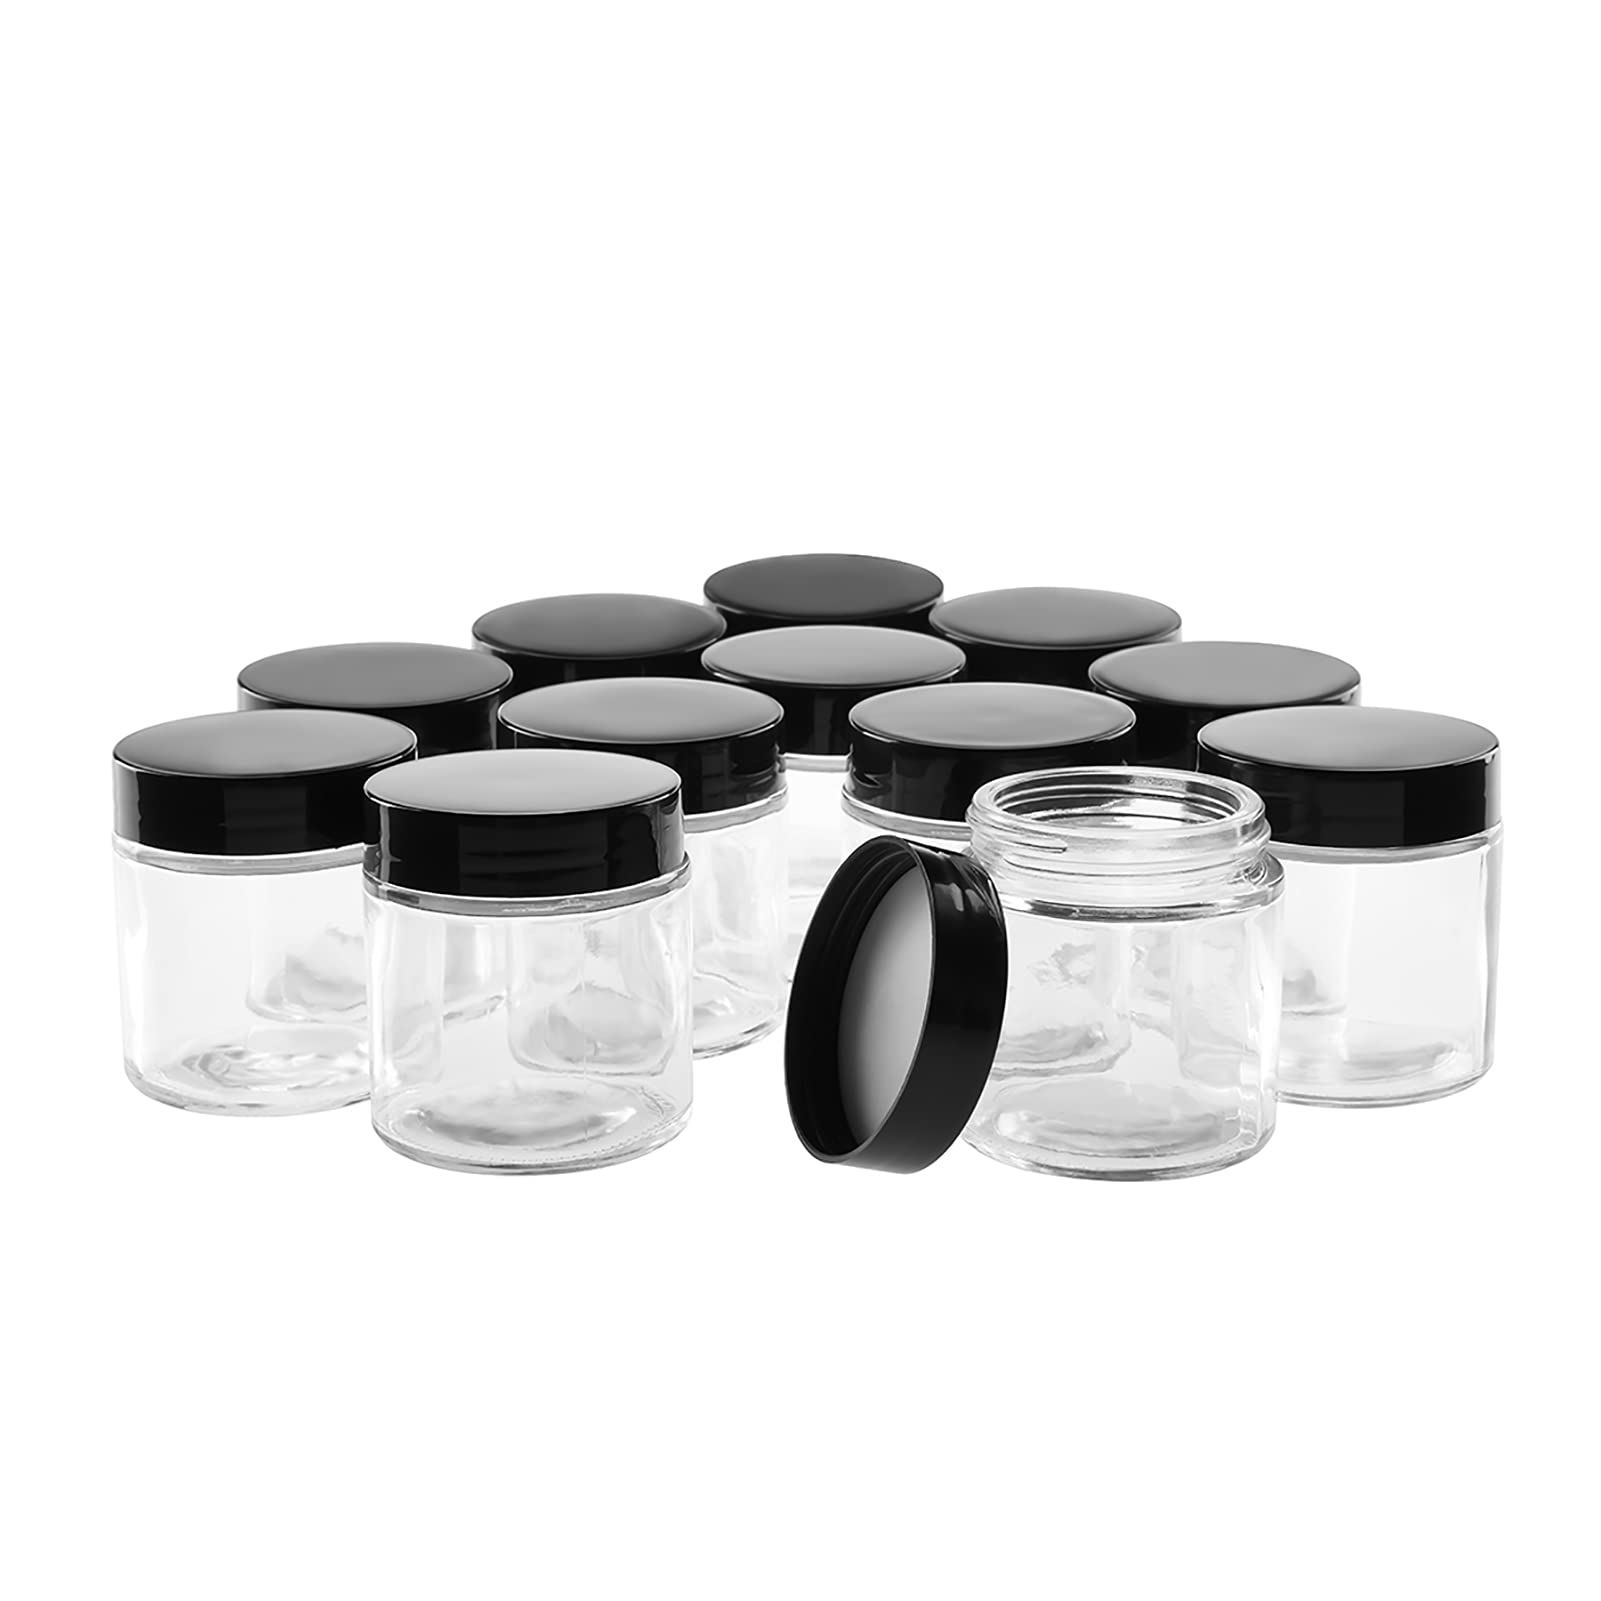 4OZ Glass Jars with Lids, Hoa Kinh Small Glass Jars, 12 Pack Empty Round  Canning Storage Jars Containers for Storing Lotions, Powders, and Ointments